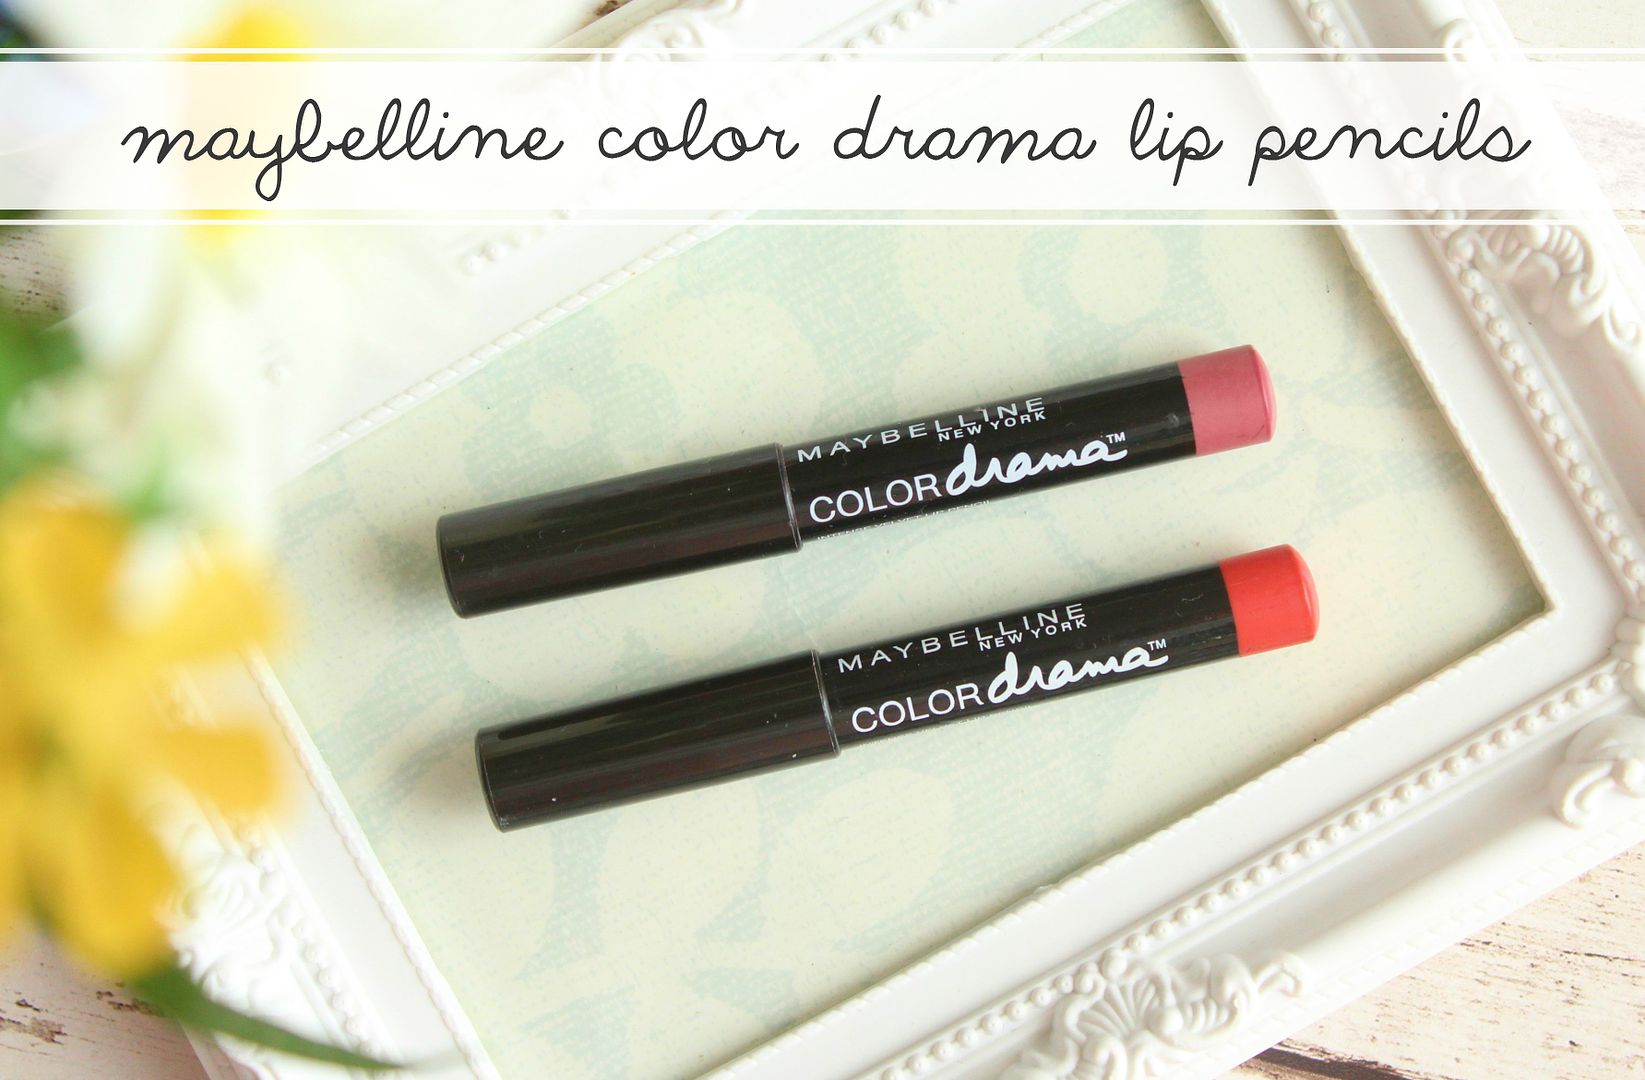 Maybelline Color Drama Lipstick Lip Pencils Keep It Classy Fab Orange Review Swatch Belle-amie Beauty Fashion Lifestyle Blog